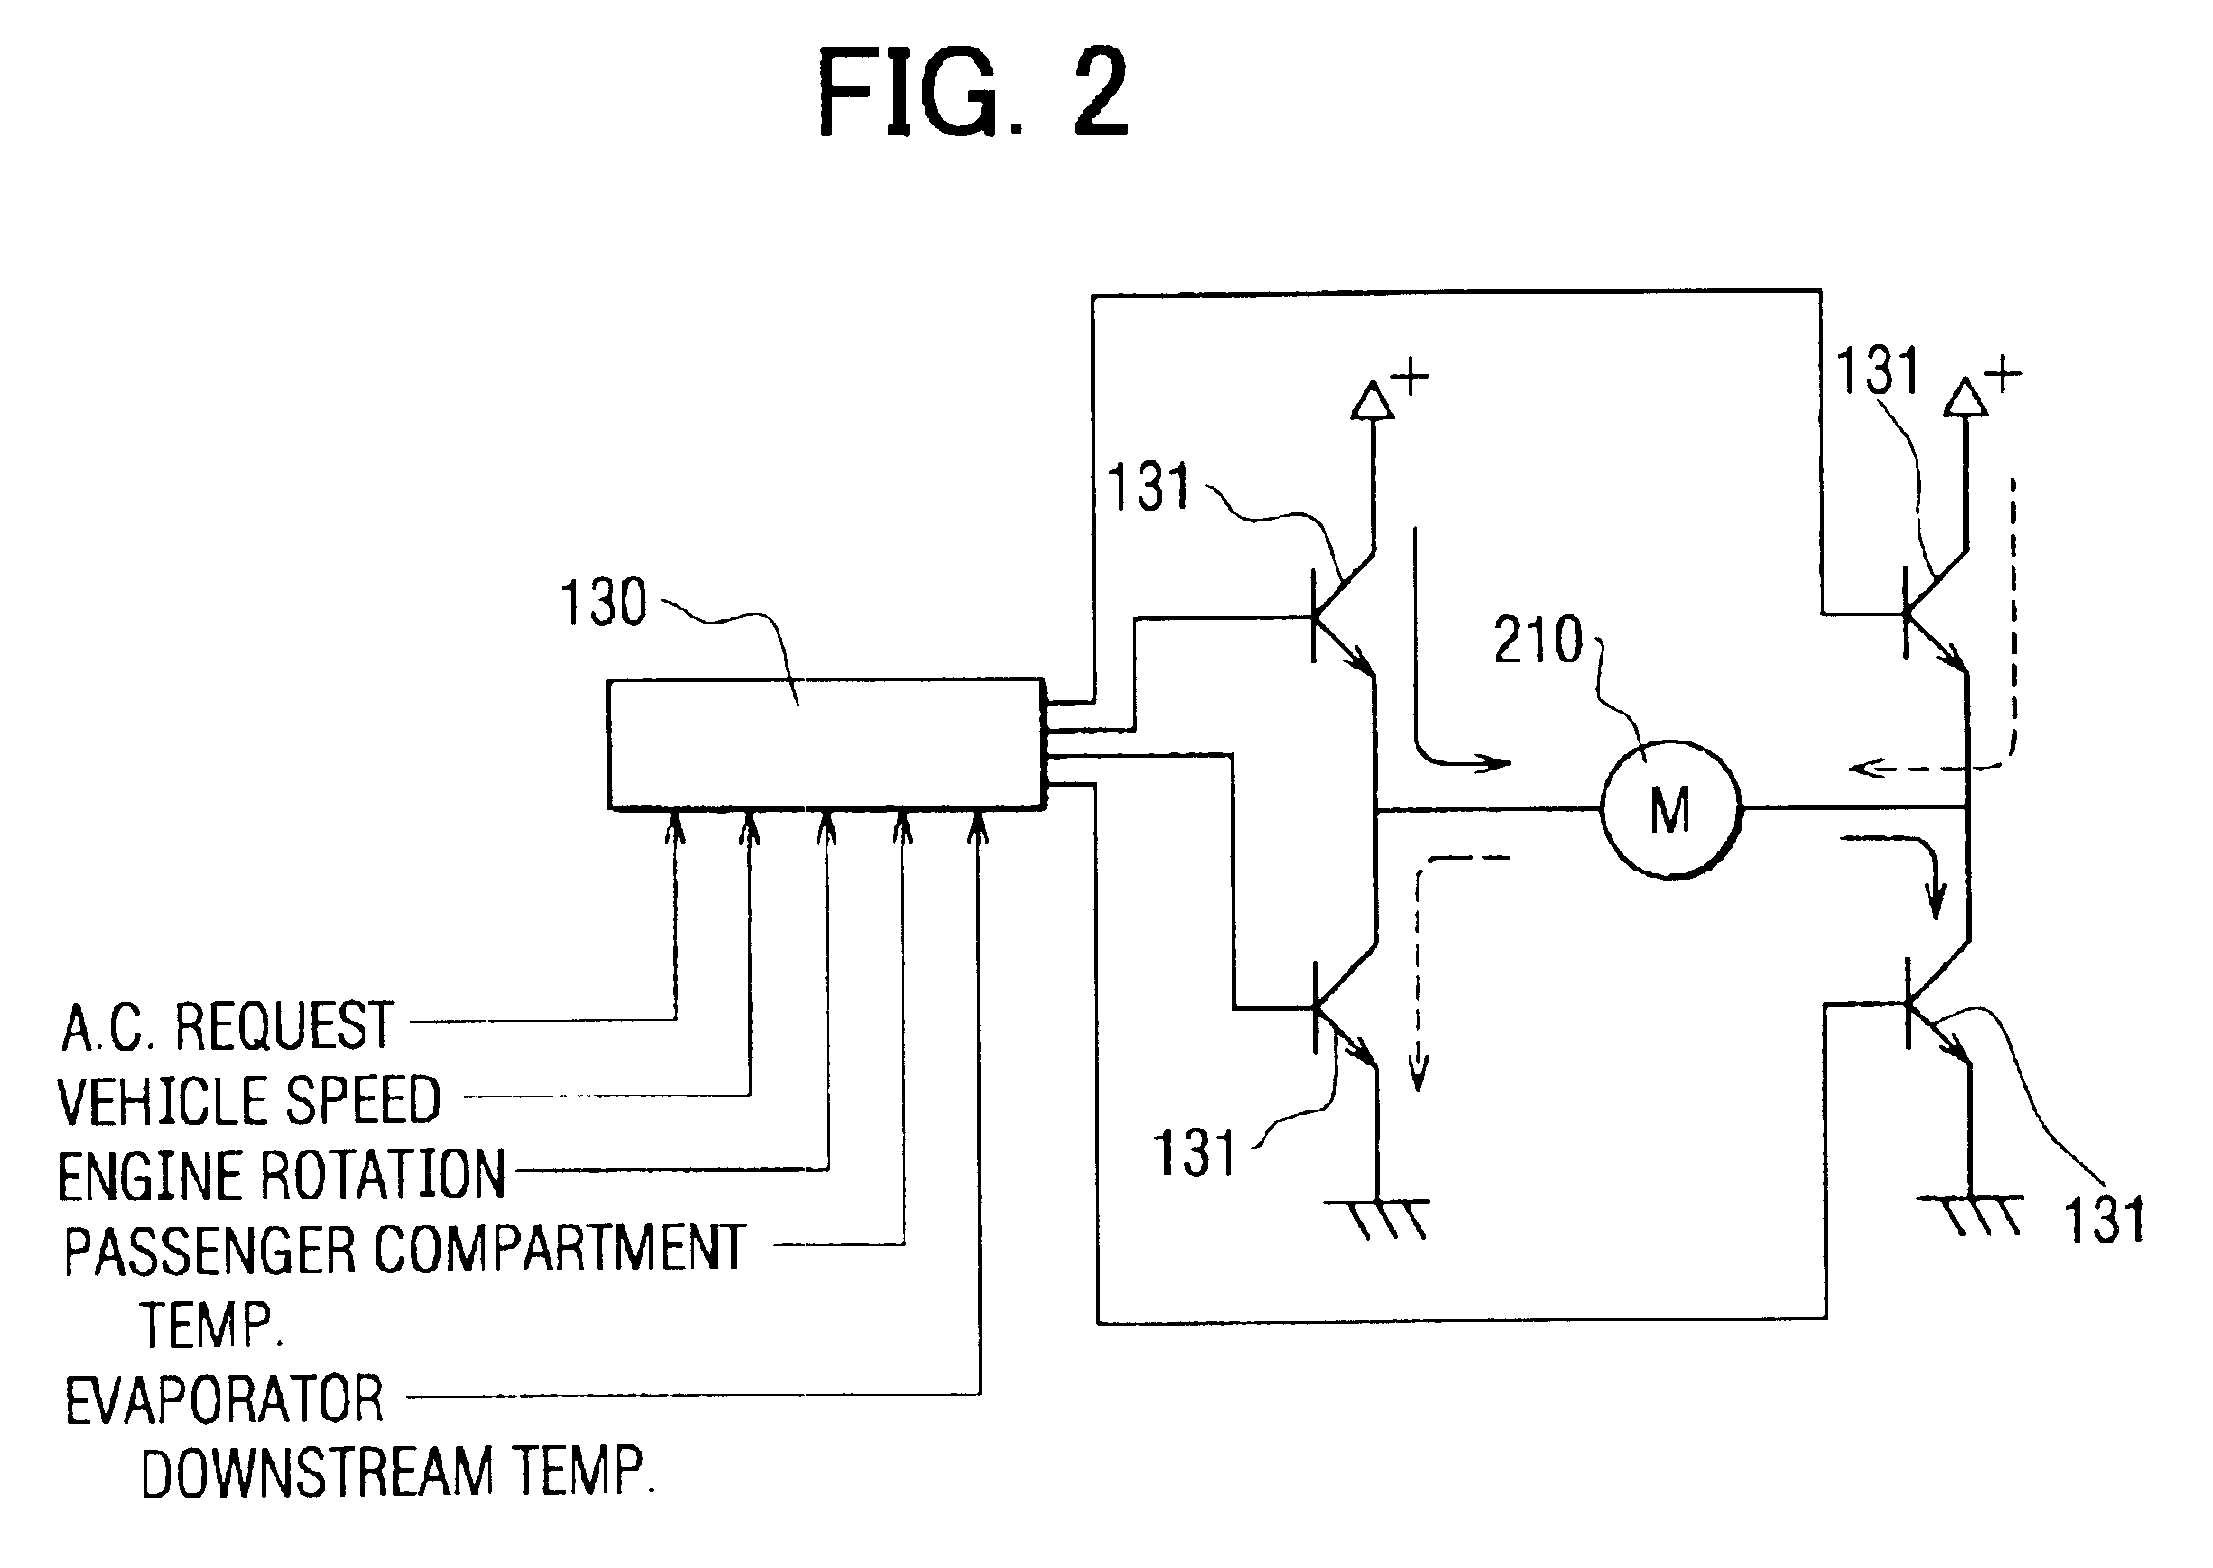 Air-conditioning apparatus including motor-driven compressor for idle stopping vehicles